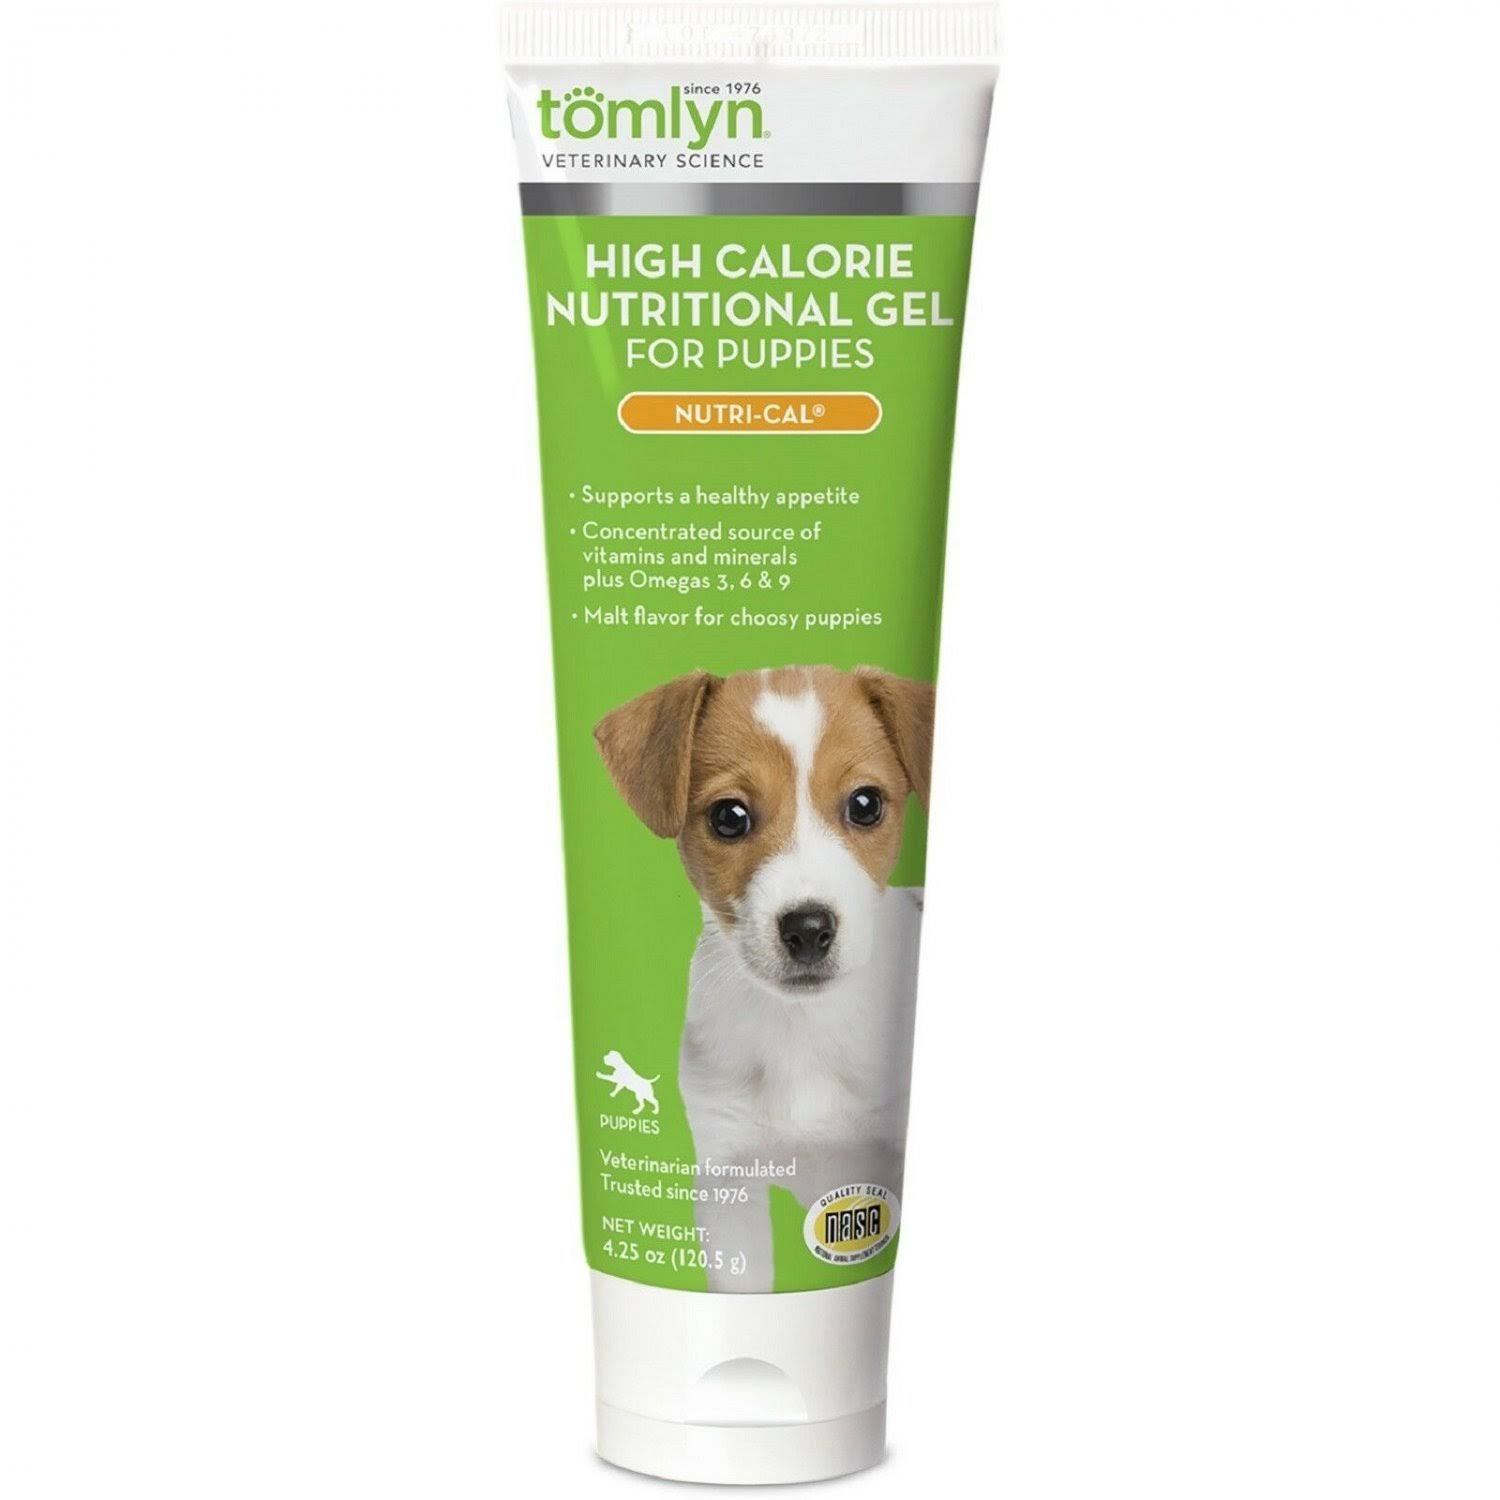 Tomlyn High Calorie Nutritional Supplement for Puppies